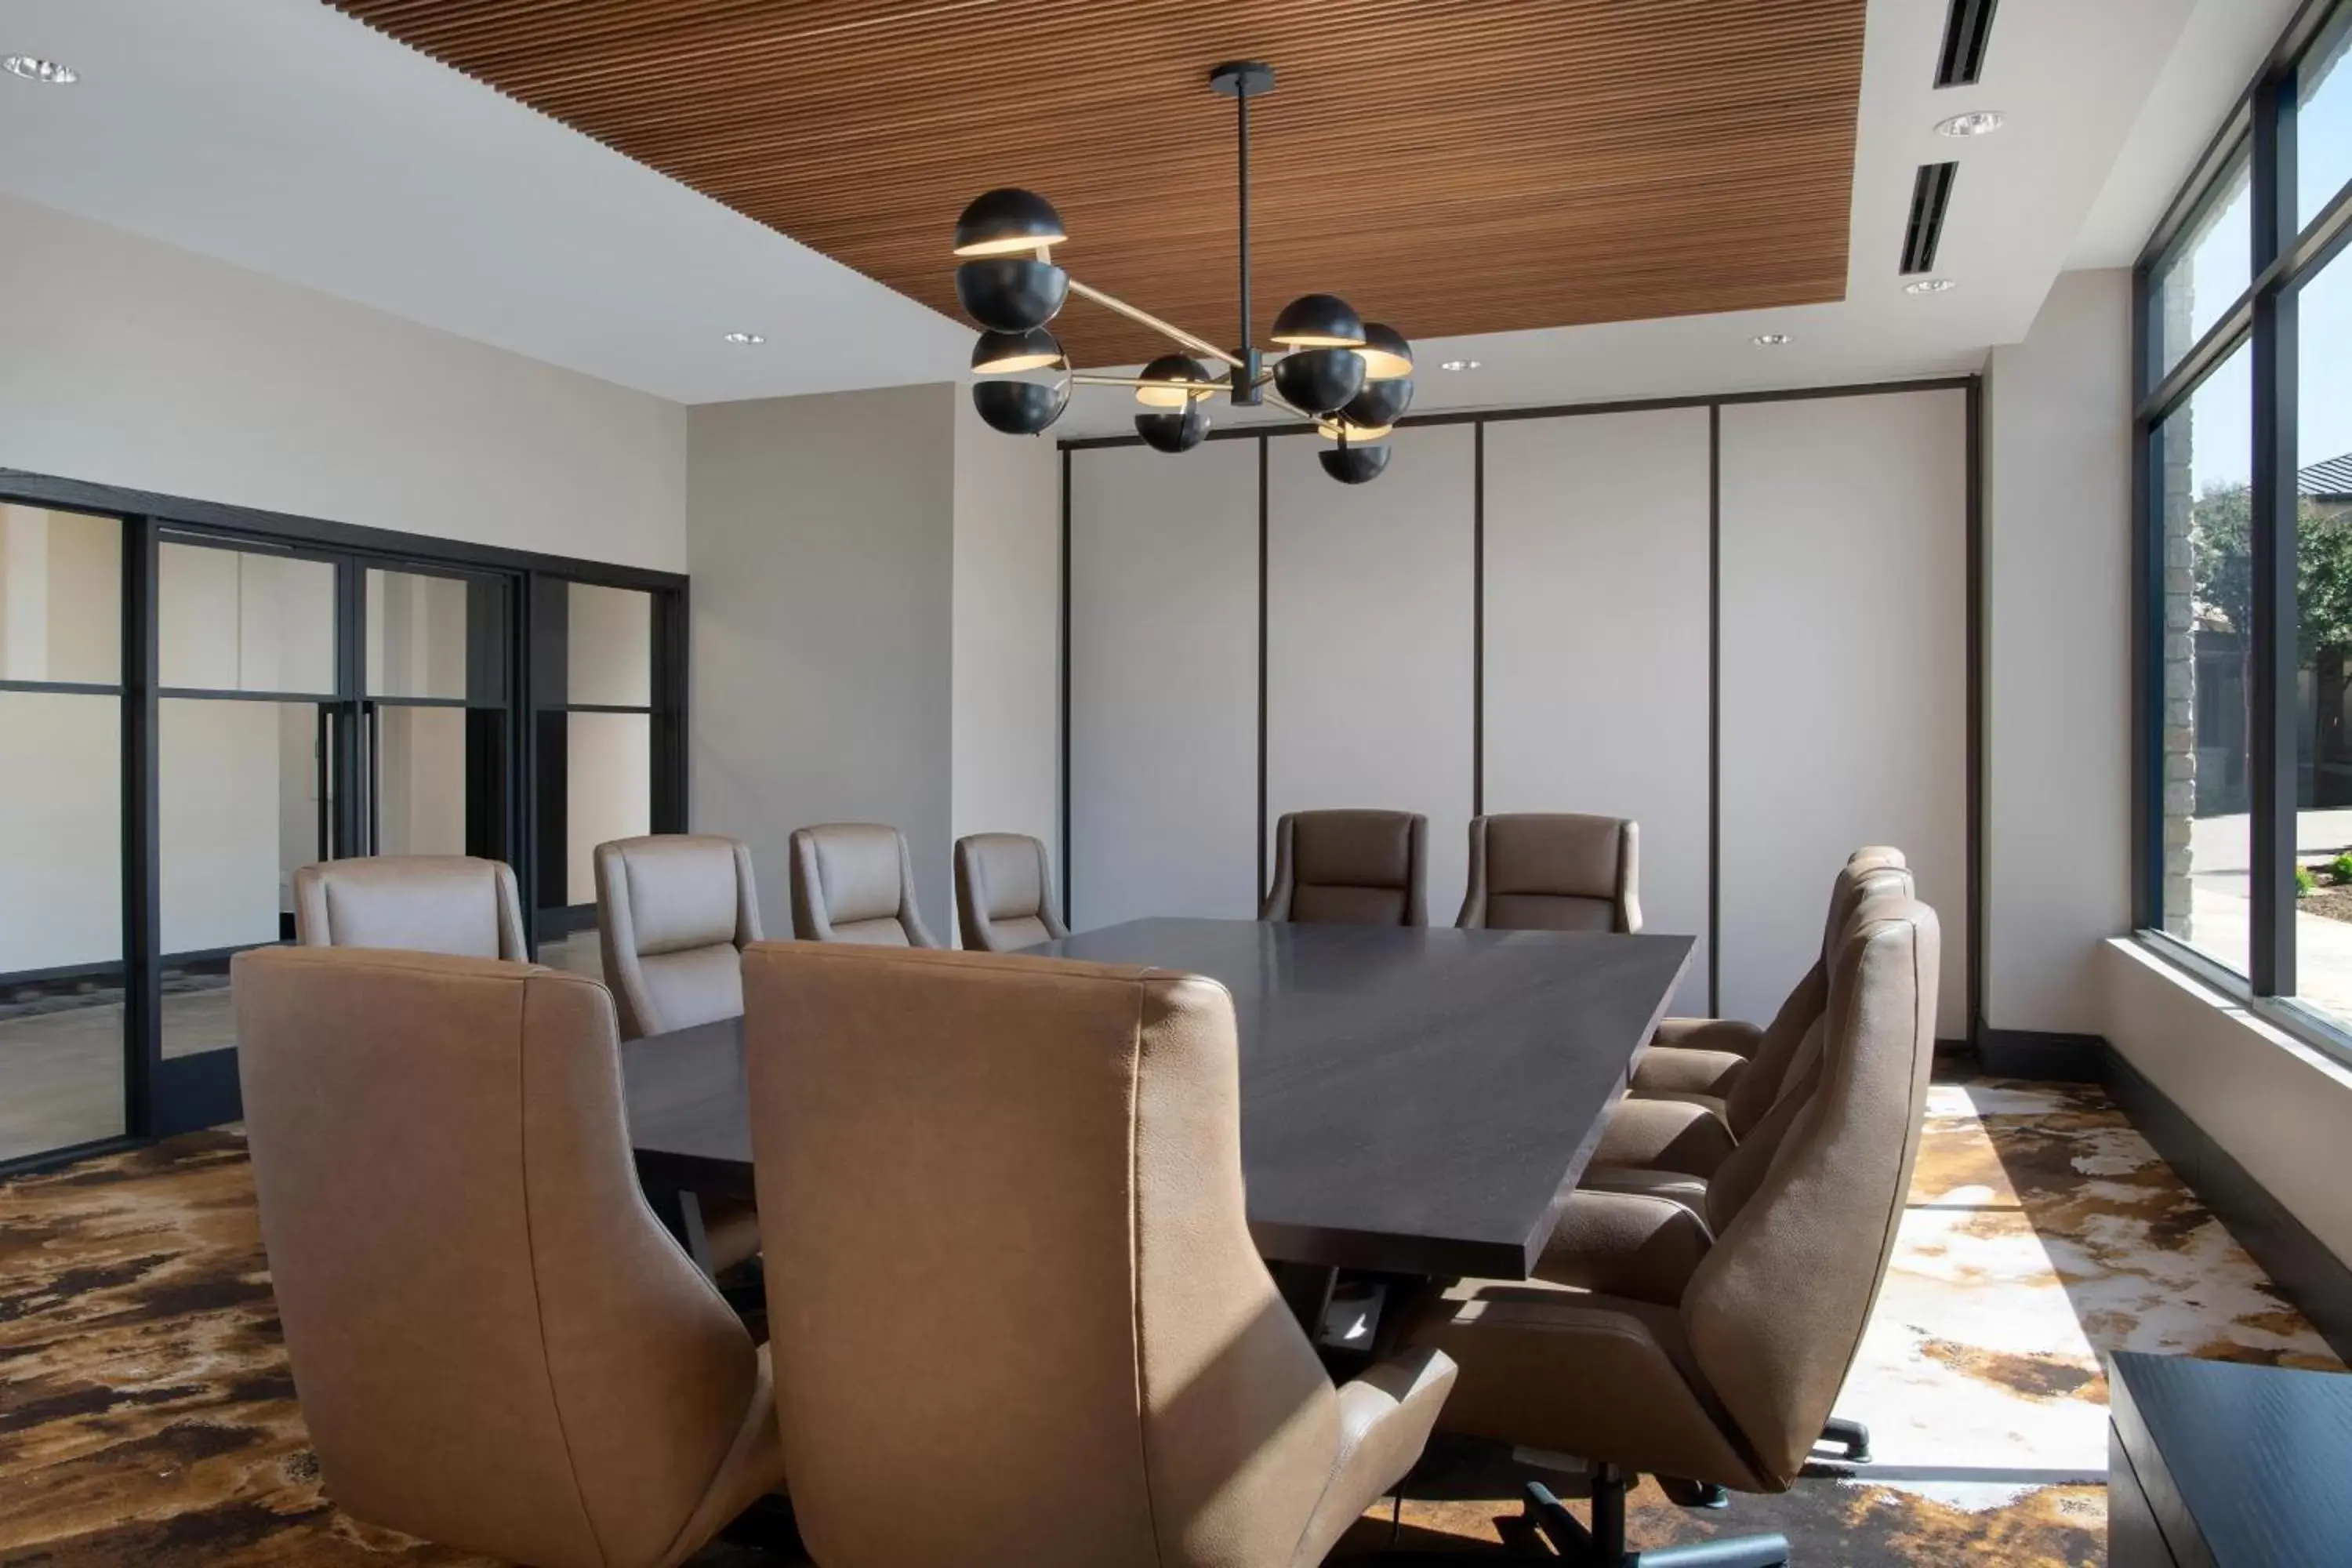 Meeting/conference room in The Westin Dallas Stonebriar Golf Resort & Spa